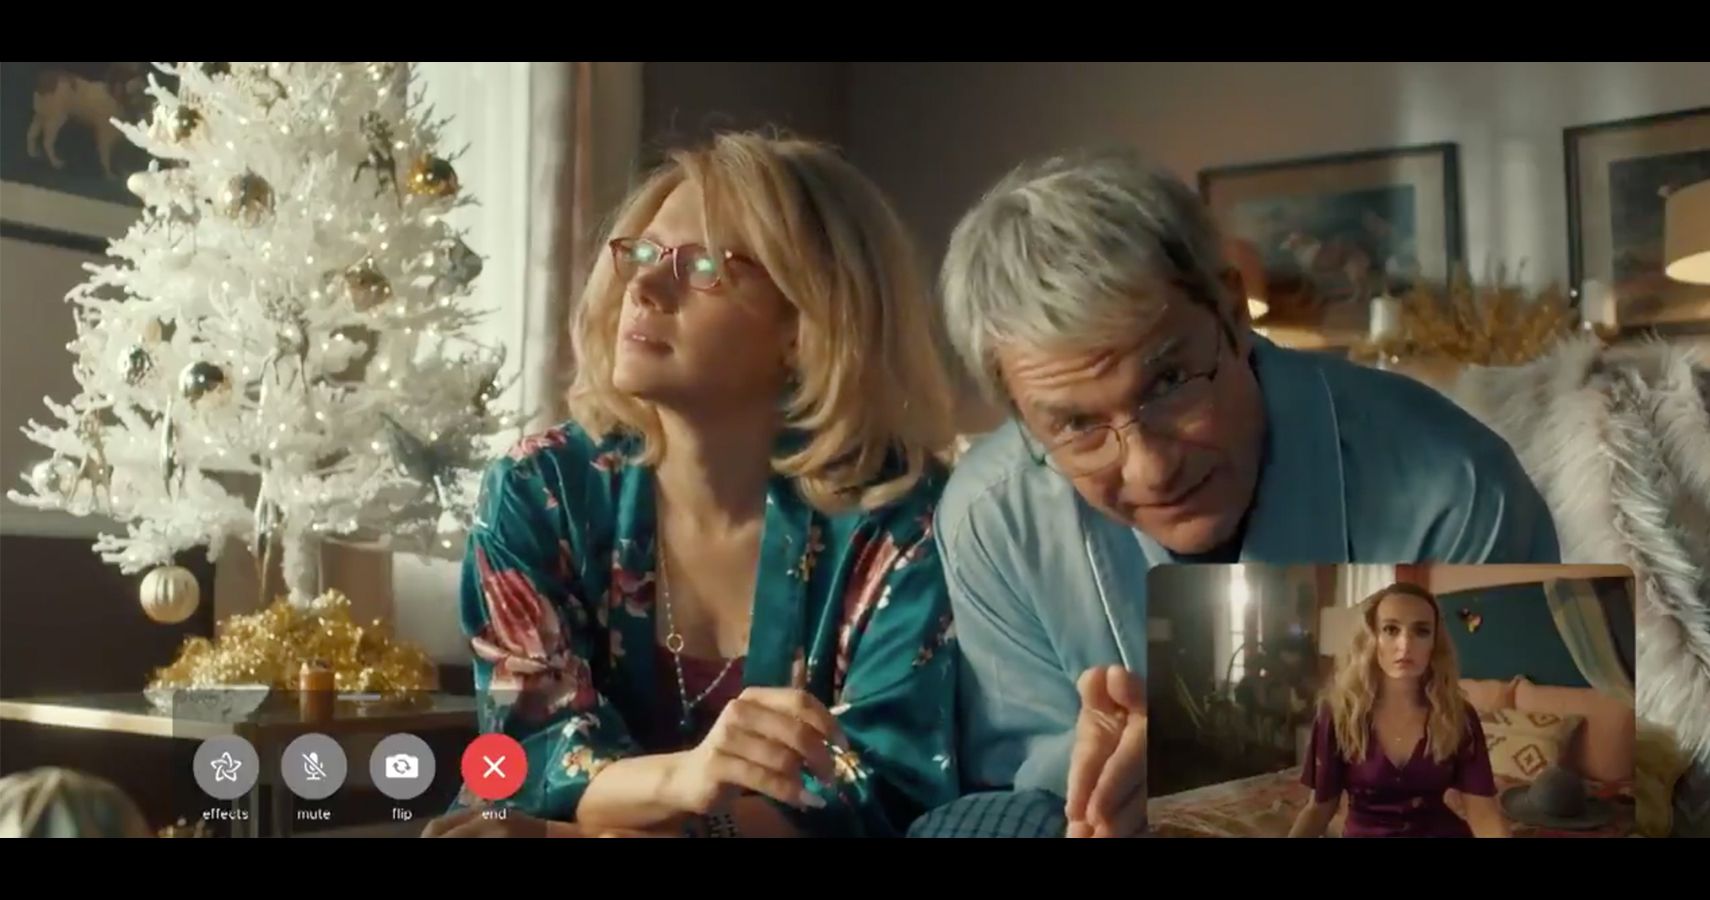 The 'SNL' Skit 'The Christmas Conversation' Hit Too Close To Home For Moms